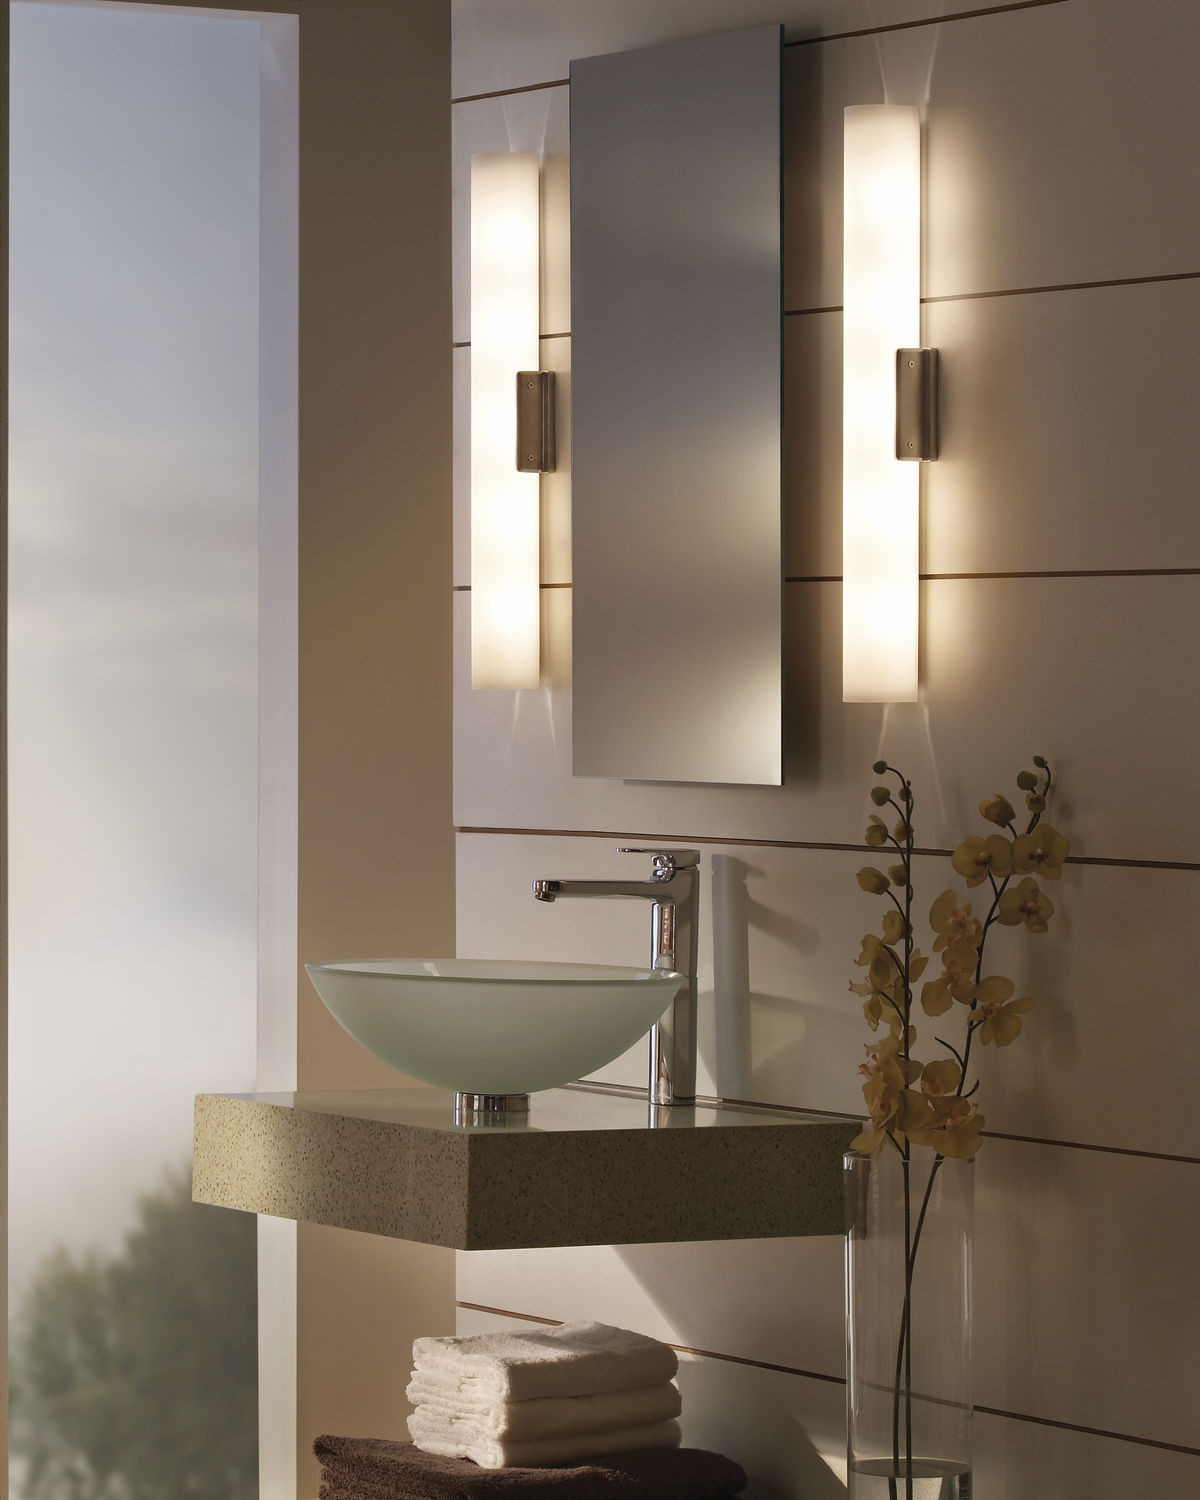 Lighting Bathroom Mirrors
 Interior Lighting How to Make it Work for You